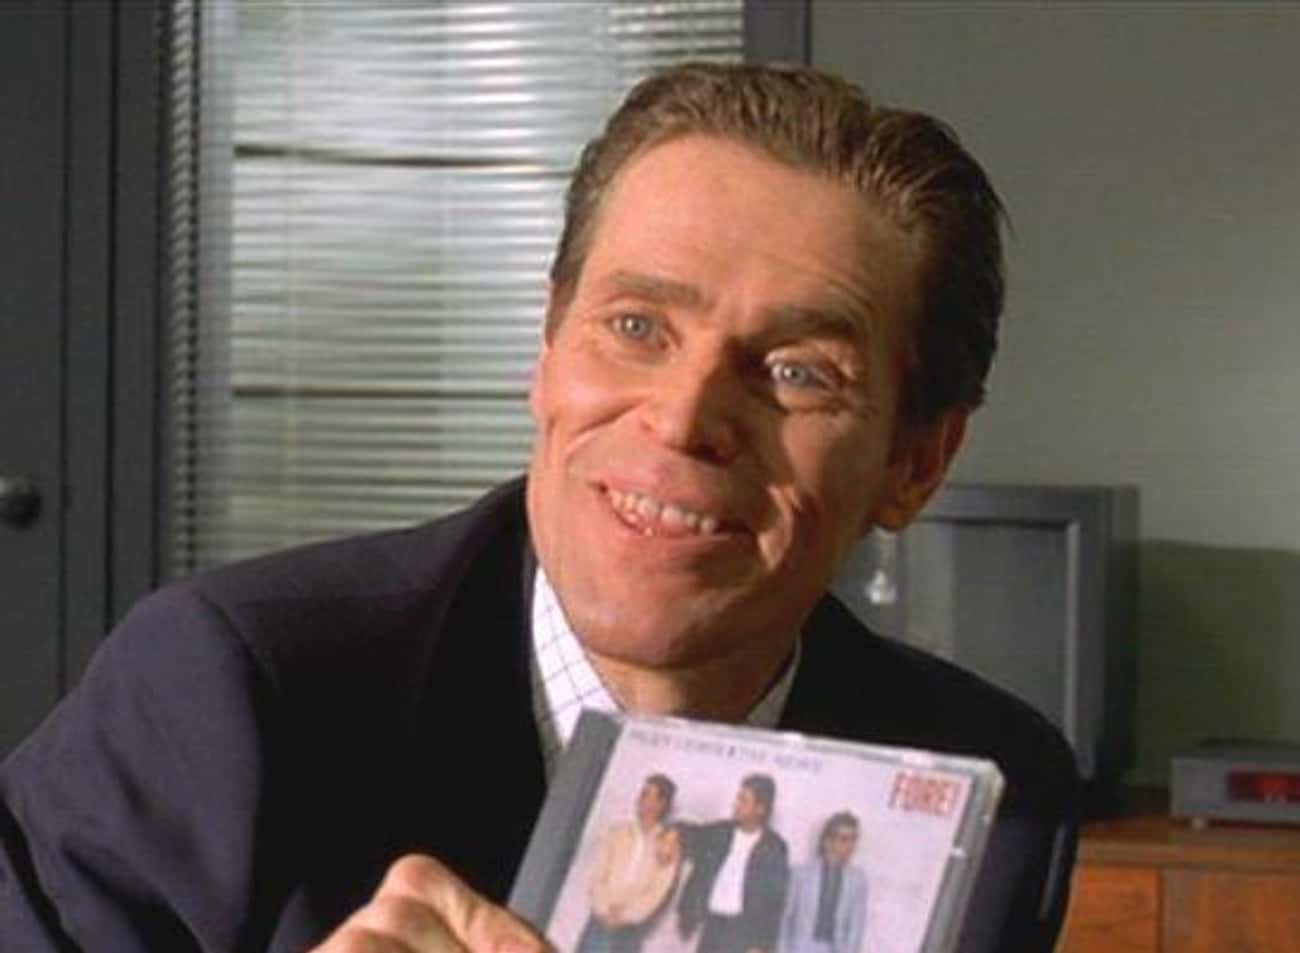 A Huey Lewis and the News-Loving Detective In ‘American Psycho’